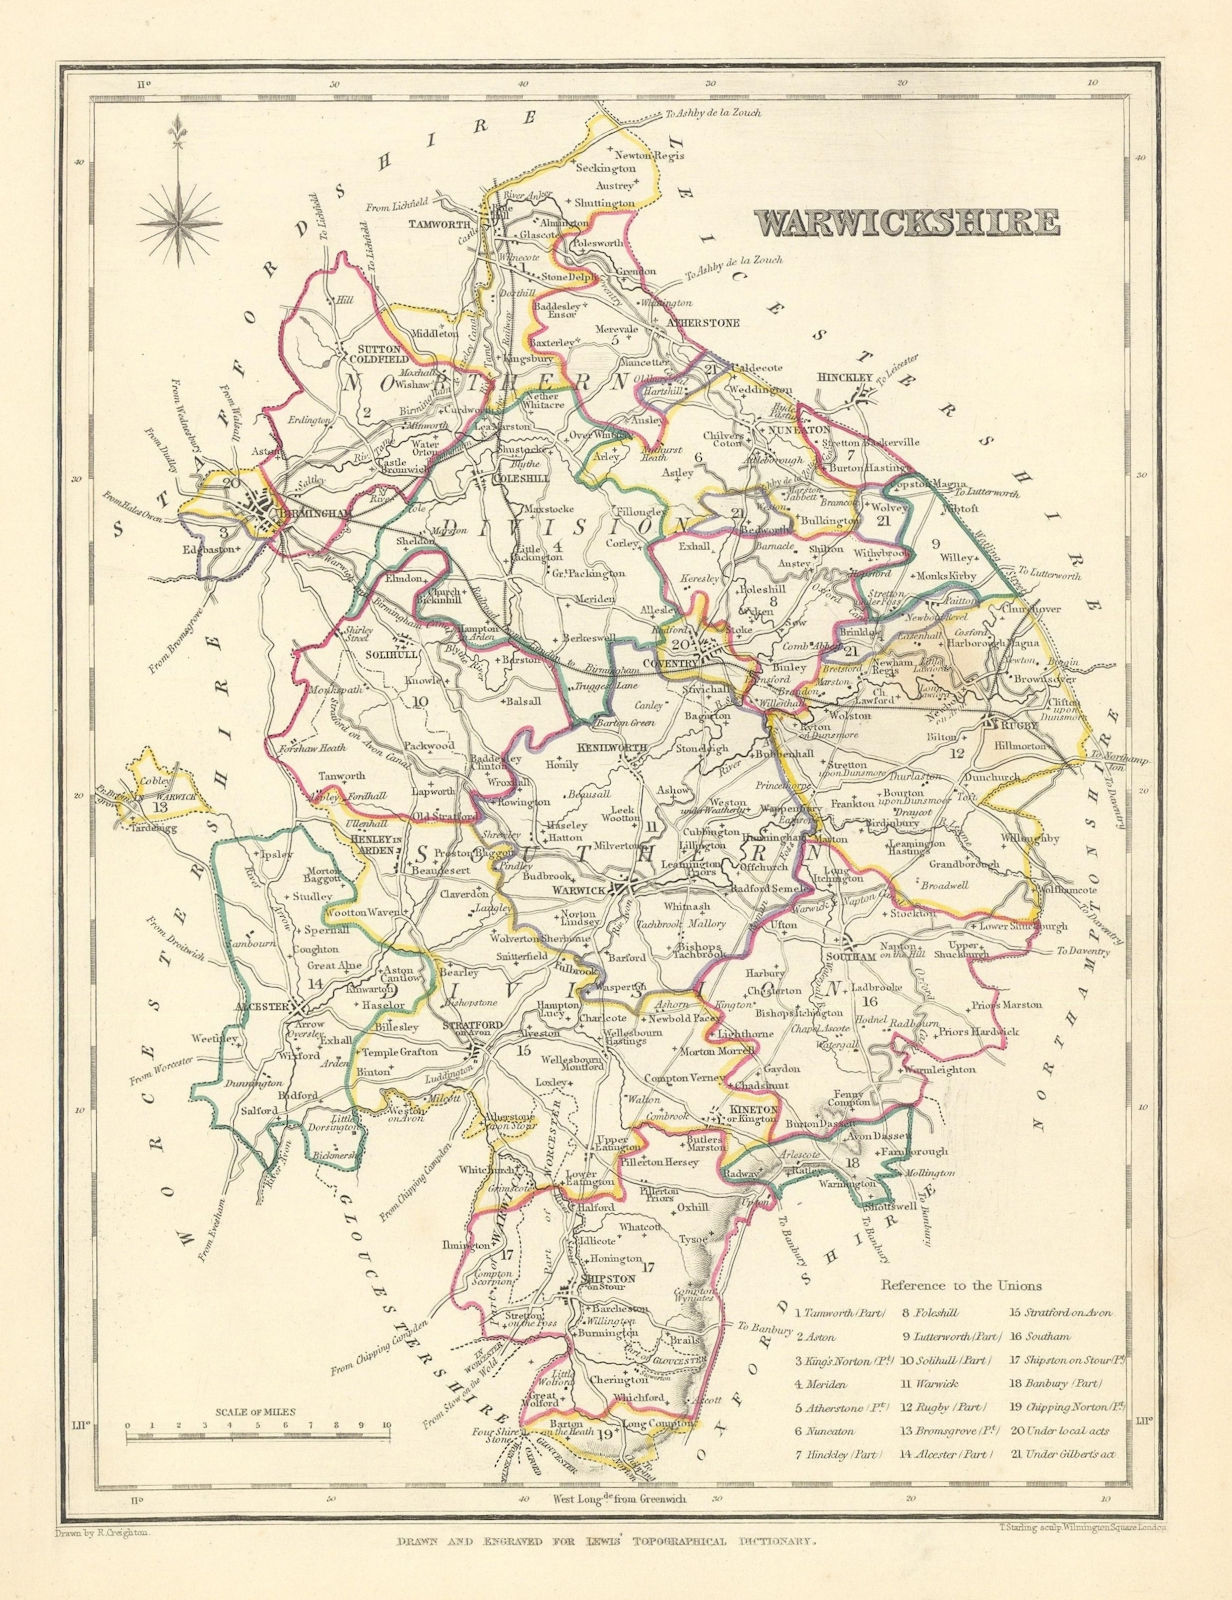 Antique county map of WARWICKSHIRE by Creighton & Starling for Lewis c1840